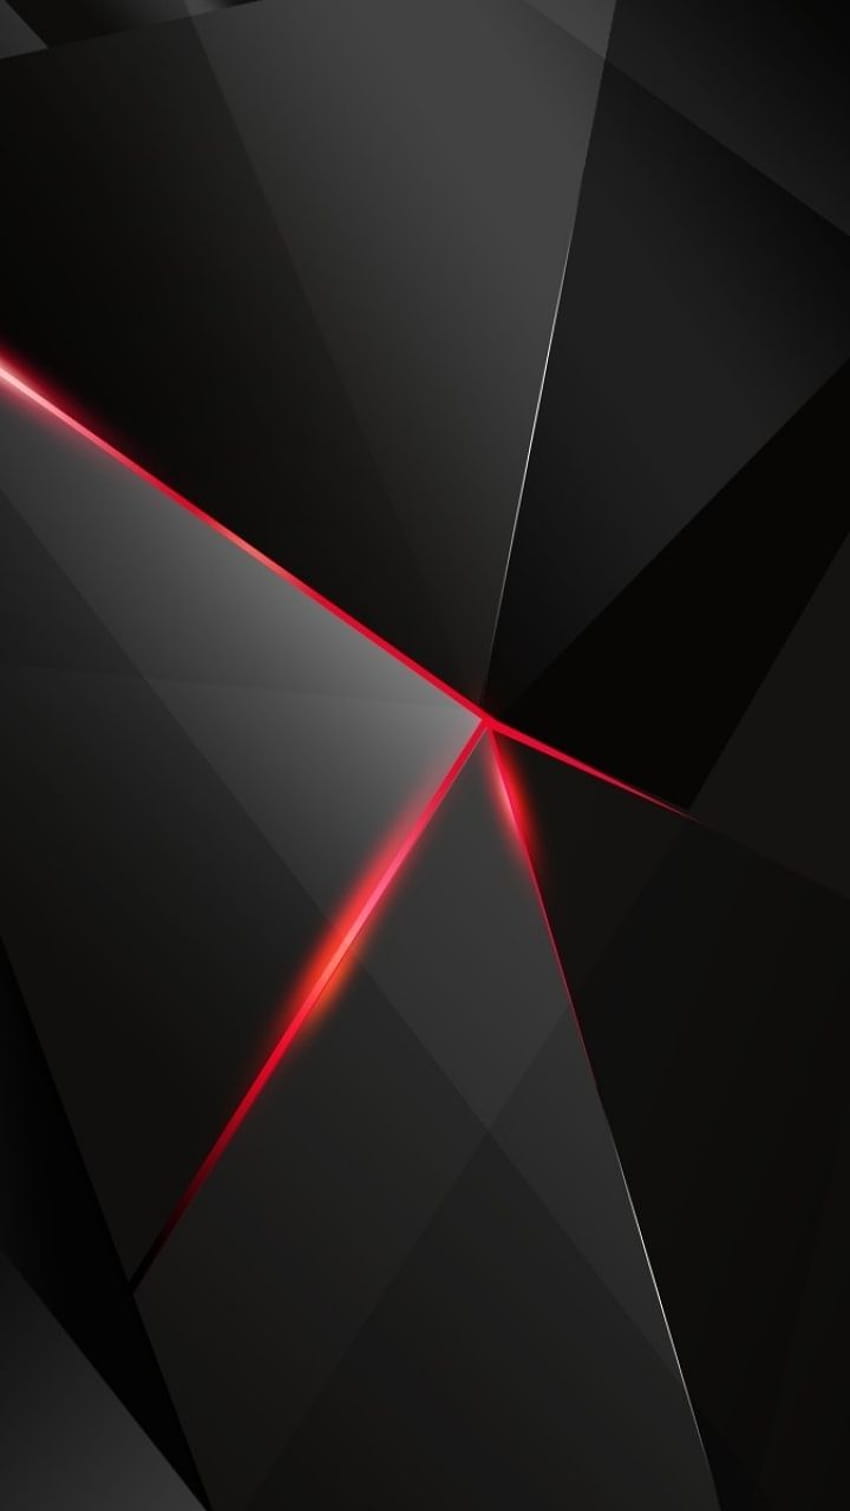 Cities LG Volt 2 for android, pure black mobile HD phone wallpaper